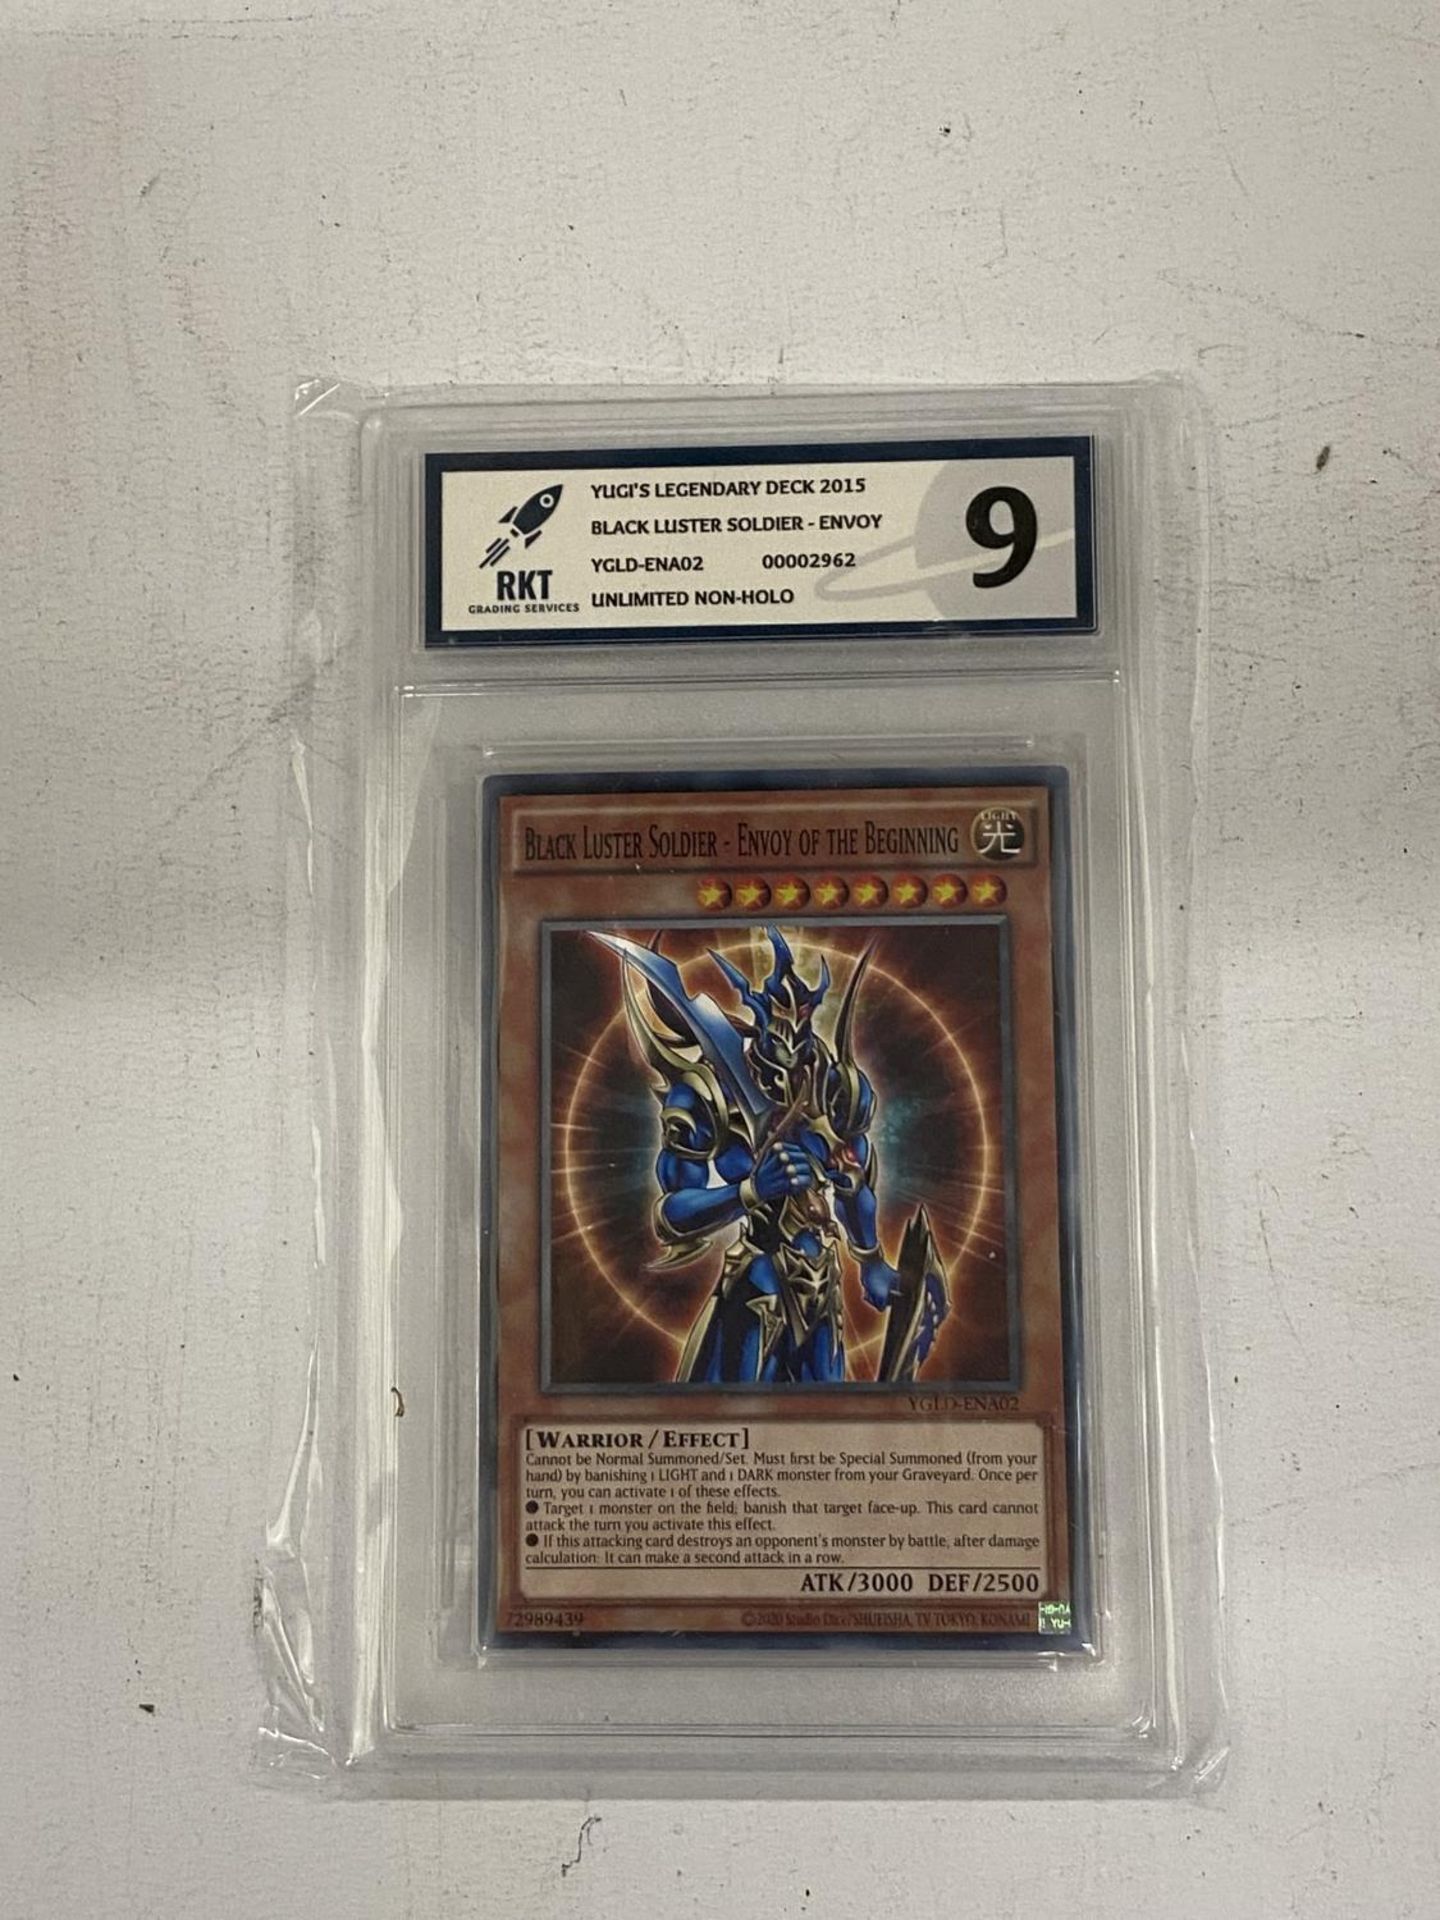 AN RKT GRADING SERVICES 9/10 'BLACK LUSTRE SOLDIER - ENVOY OF THE BEGINNING' YU-GI-OH CARD